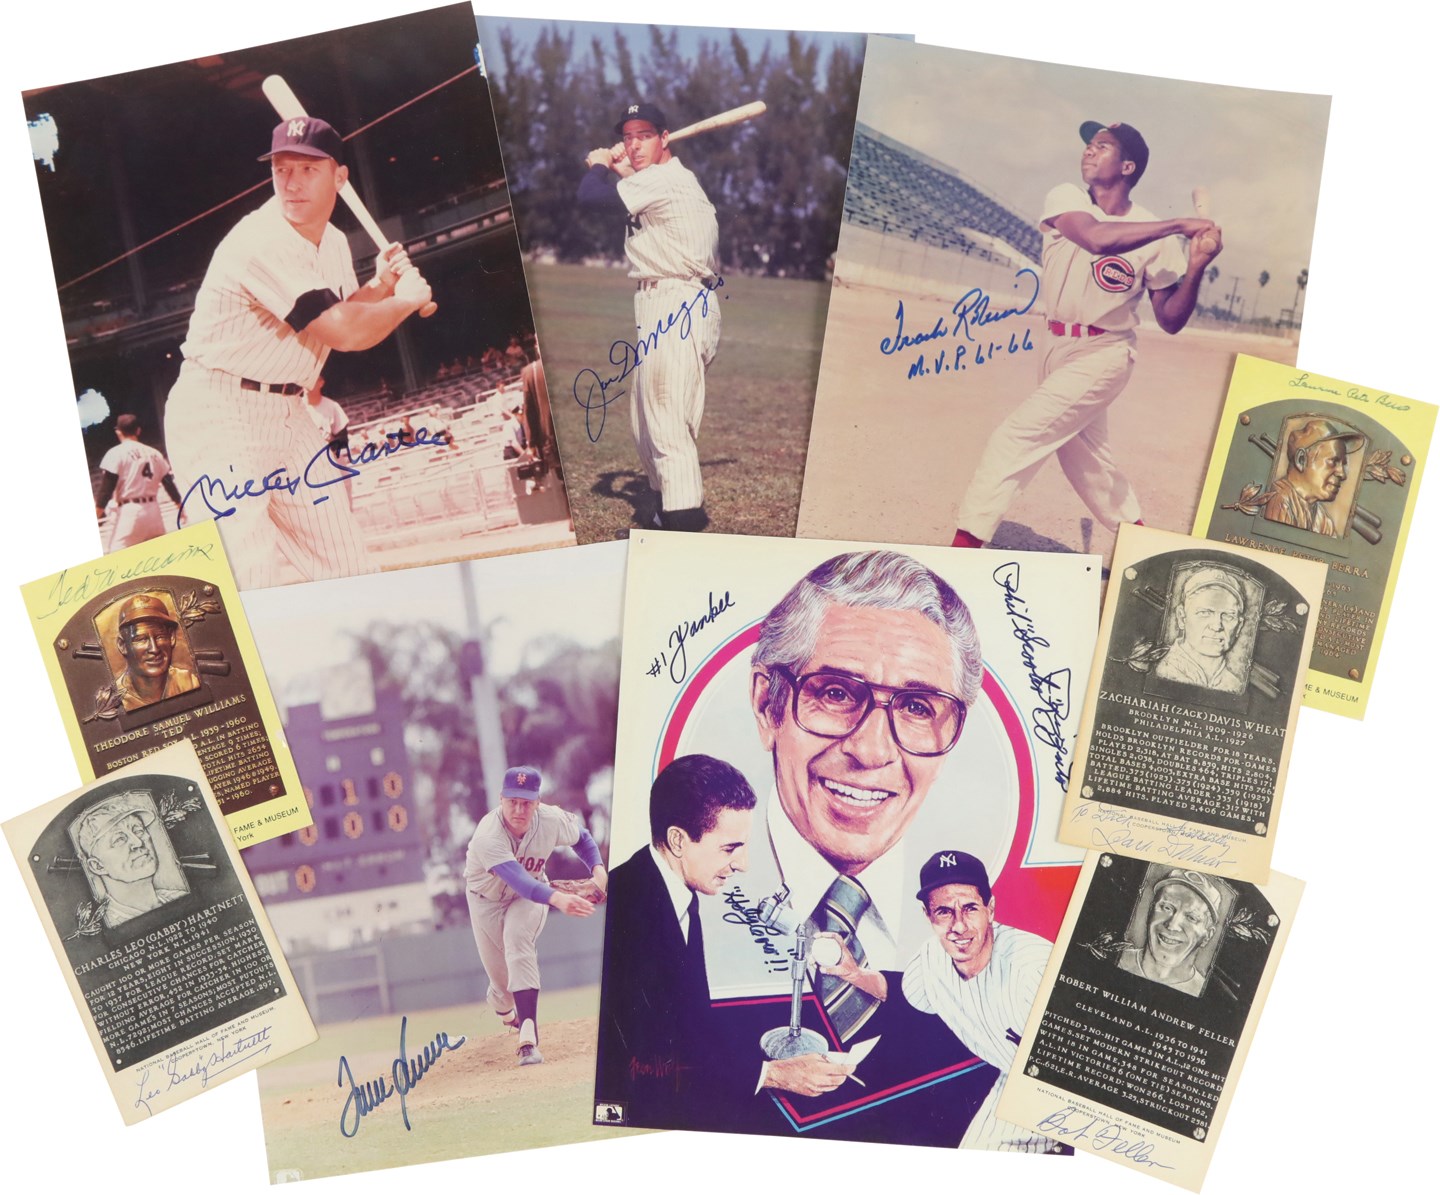 - Hall of Famers Autograph Collection w/Mantle & DiMaggio (11)